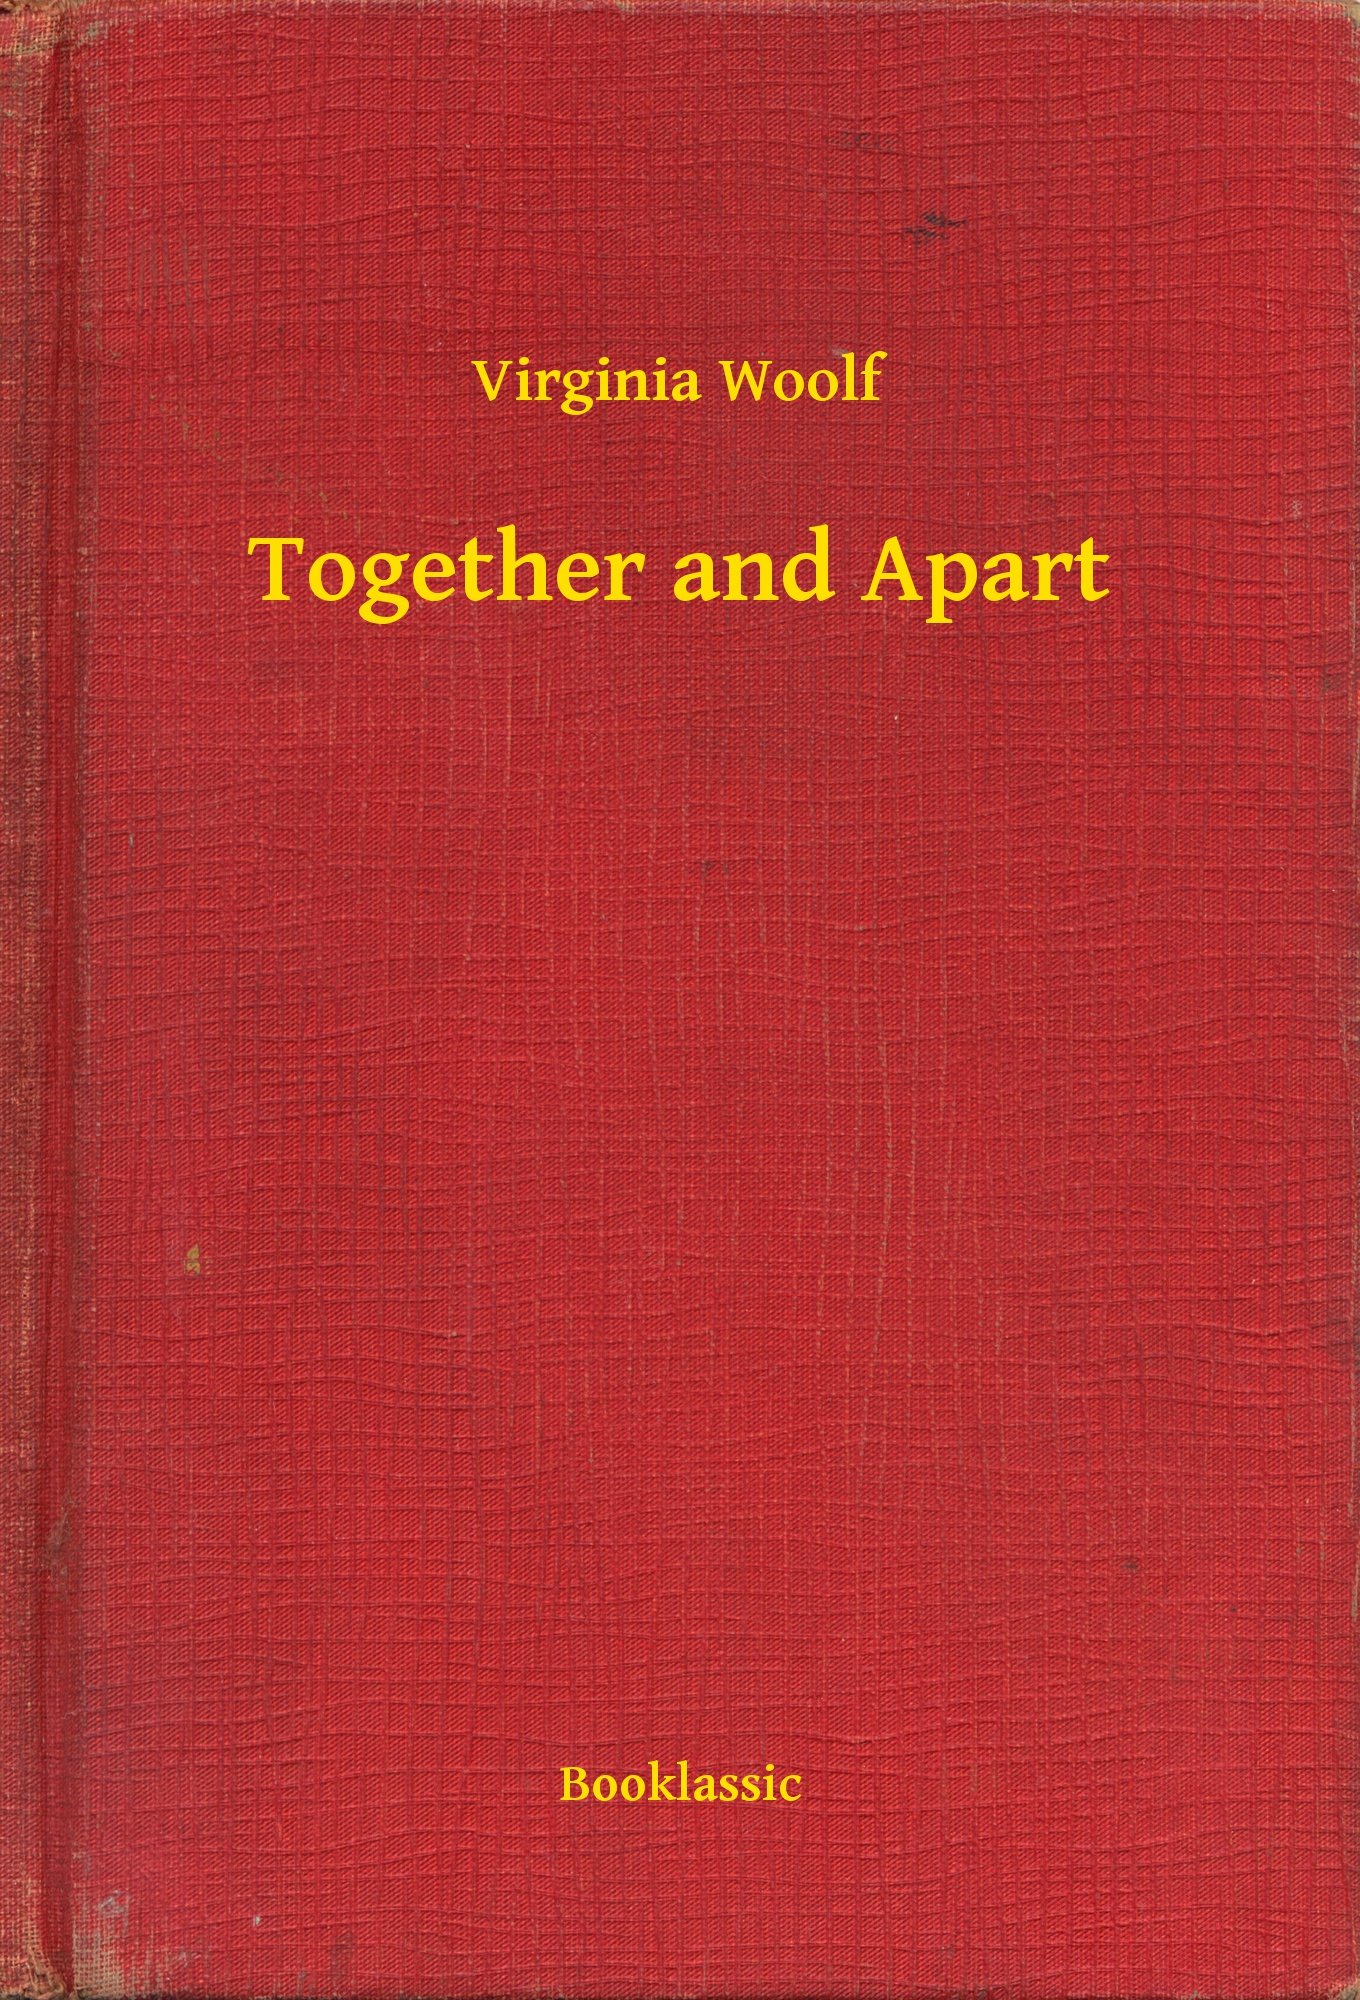 Together and Apart